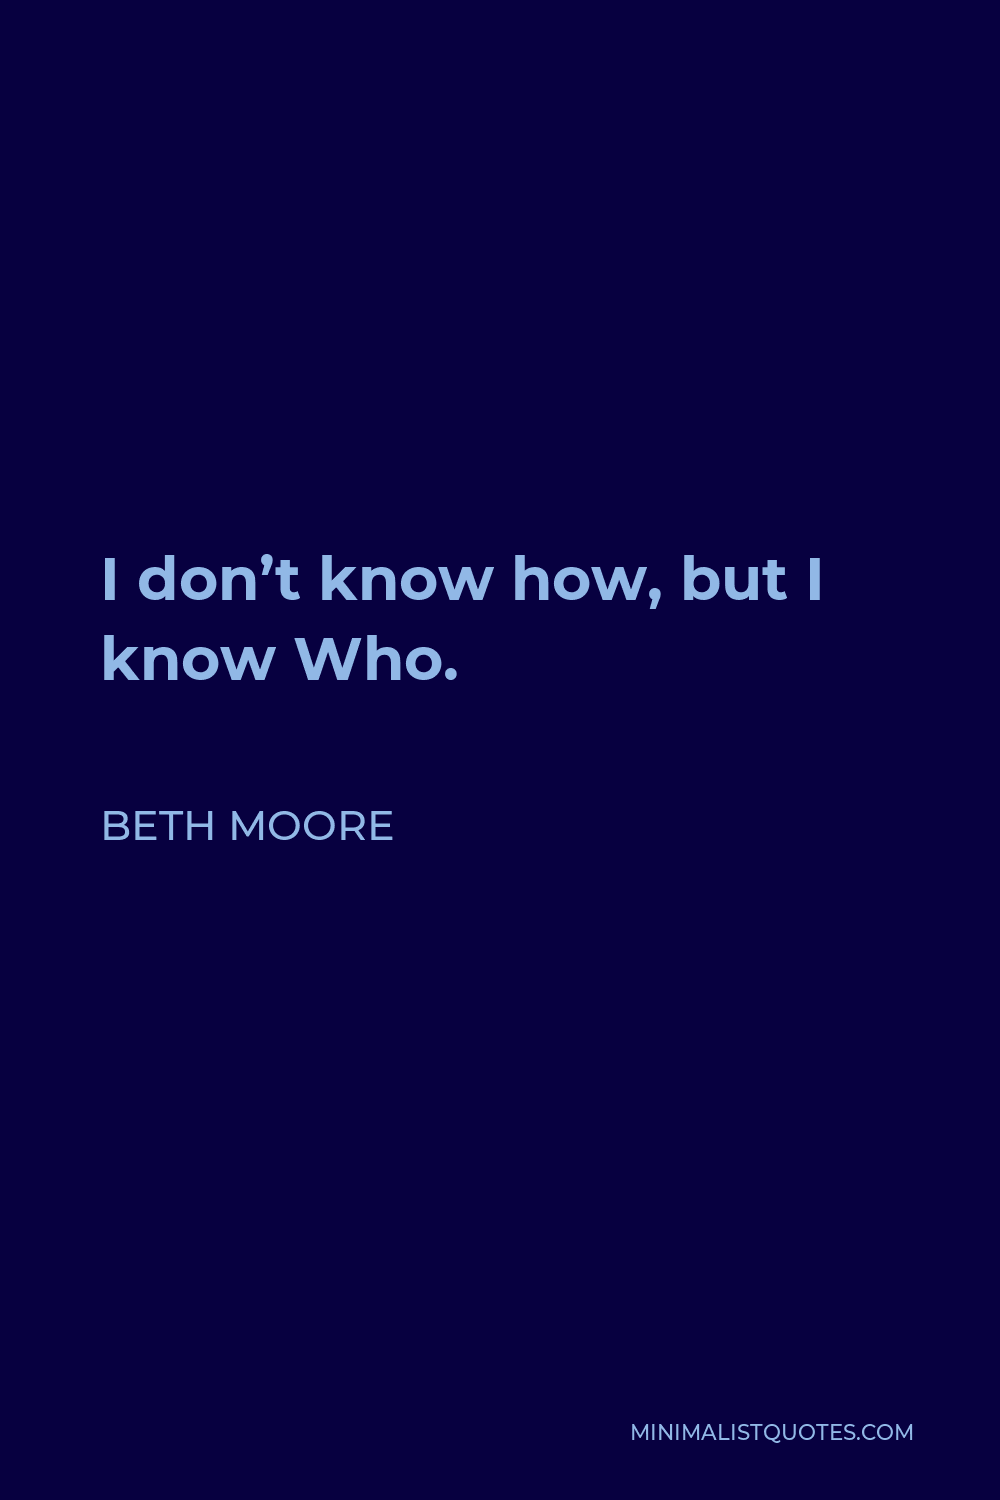 Beth Moore Quote - I don’t know how, but I know Who.